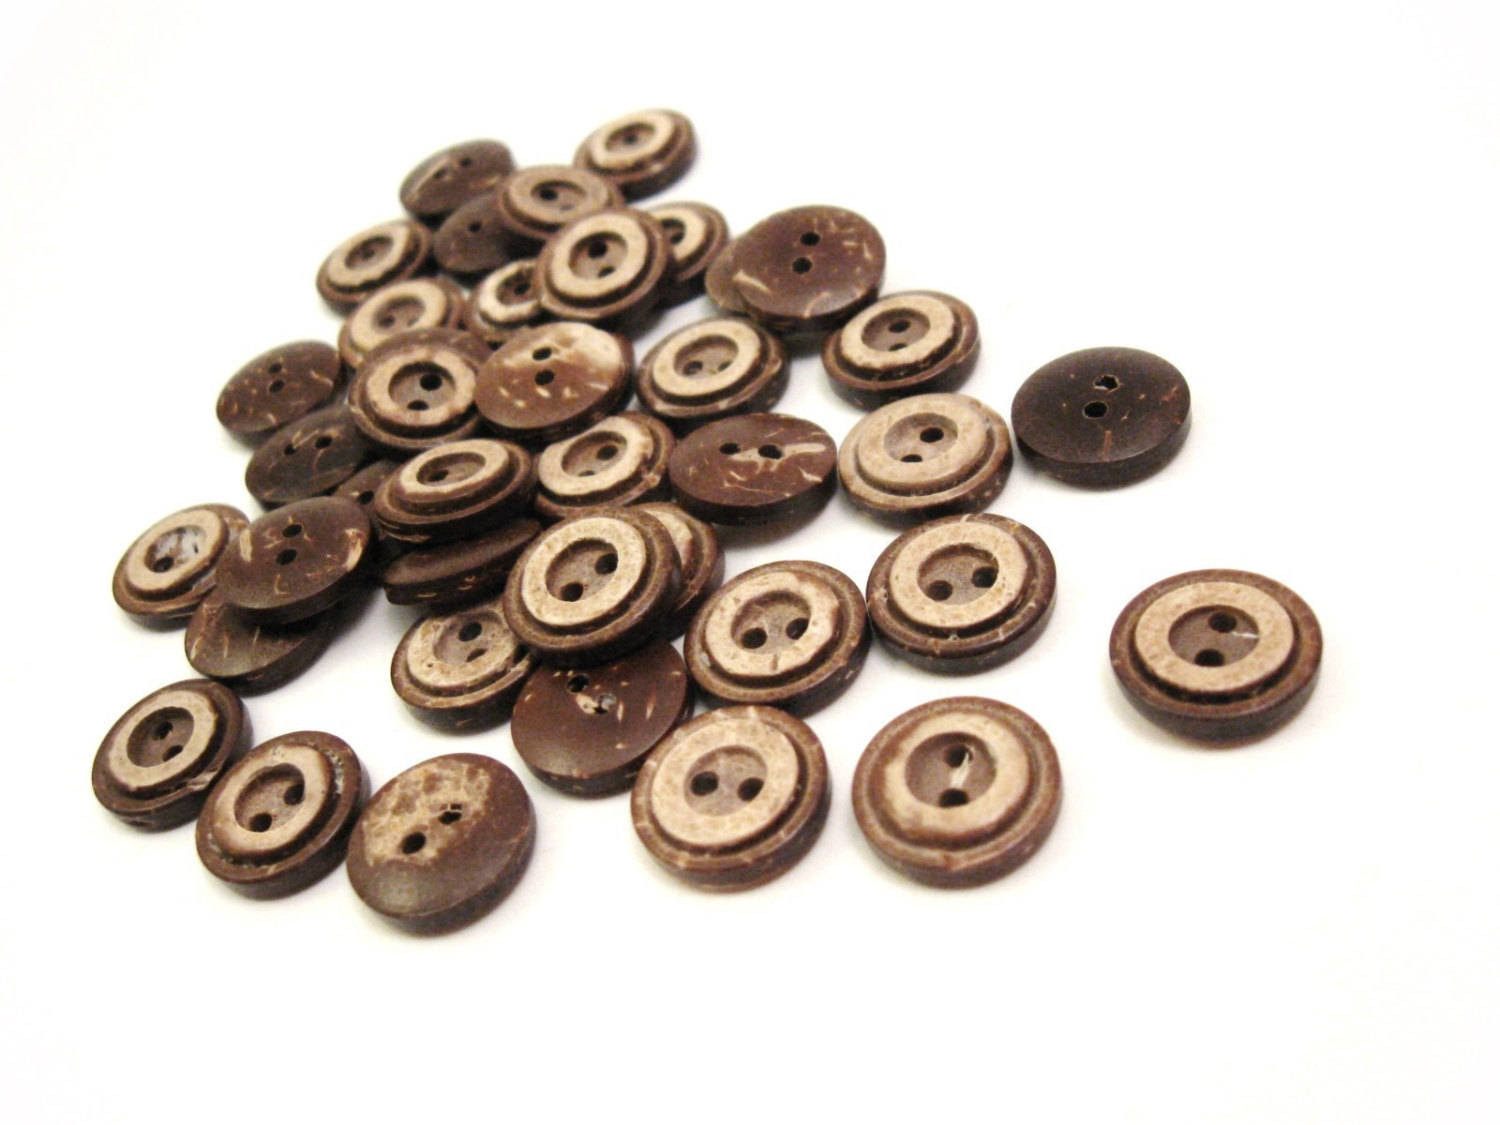 10 Brown Coconut Shell Buttons 13 or 15mm - Rustic Circle